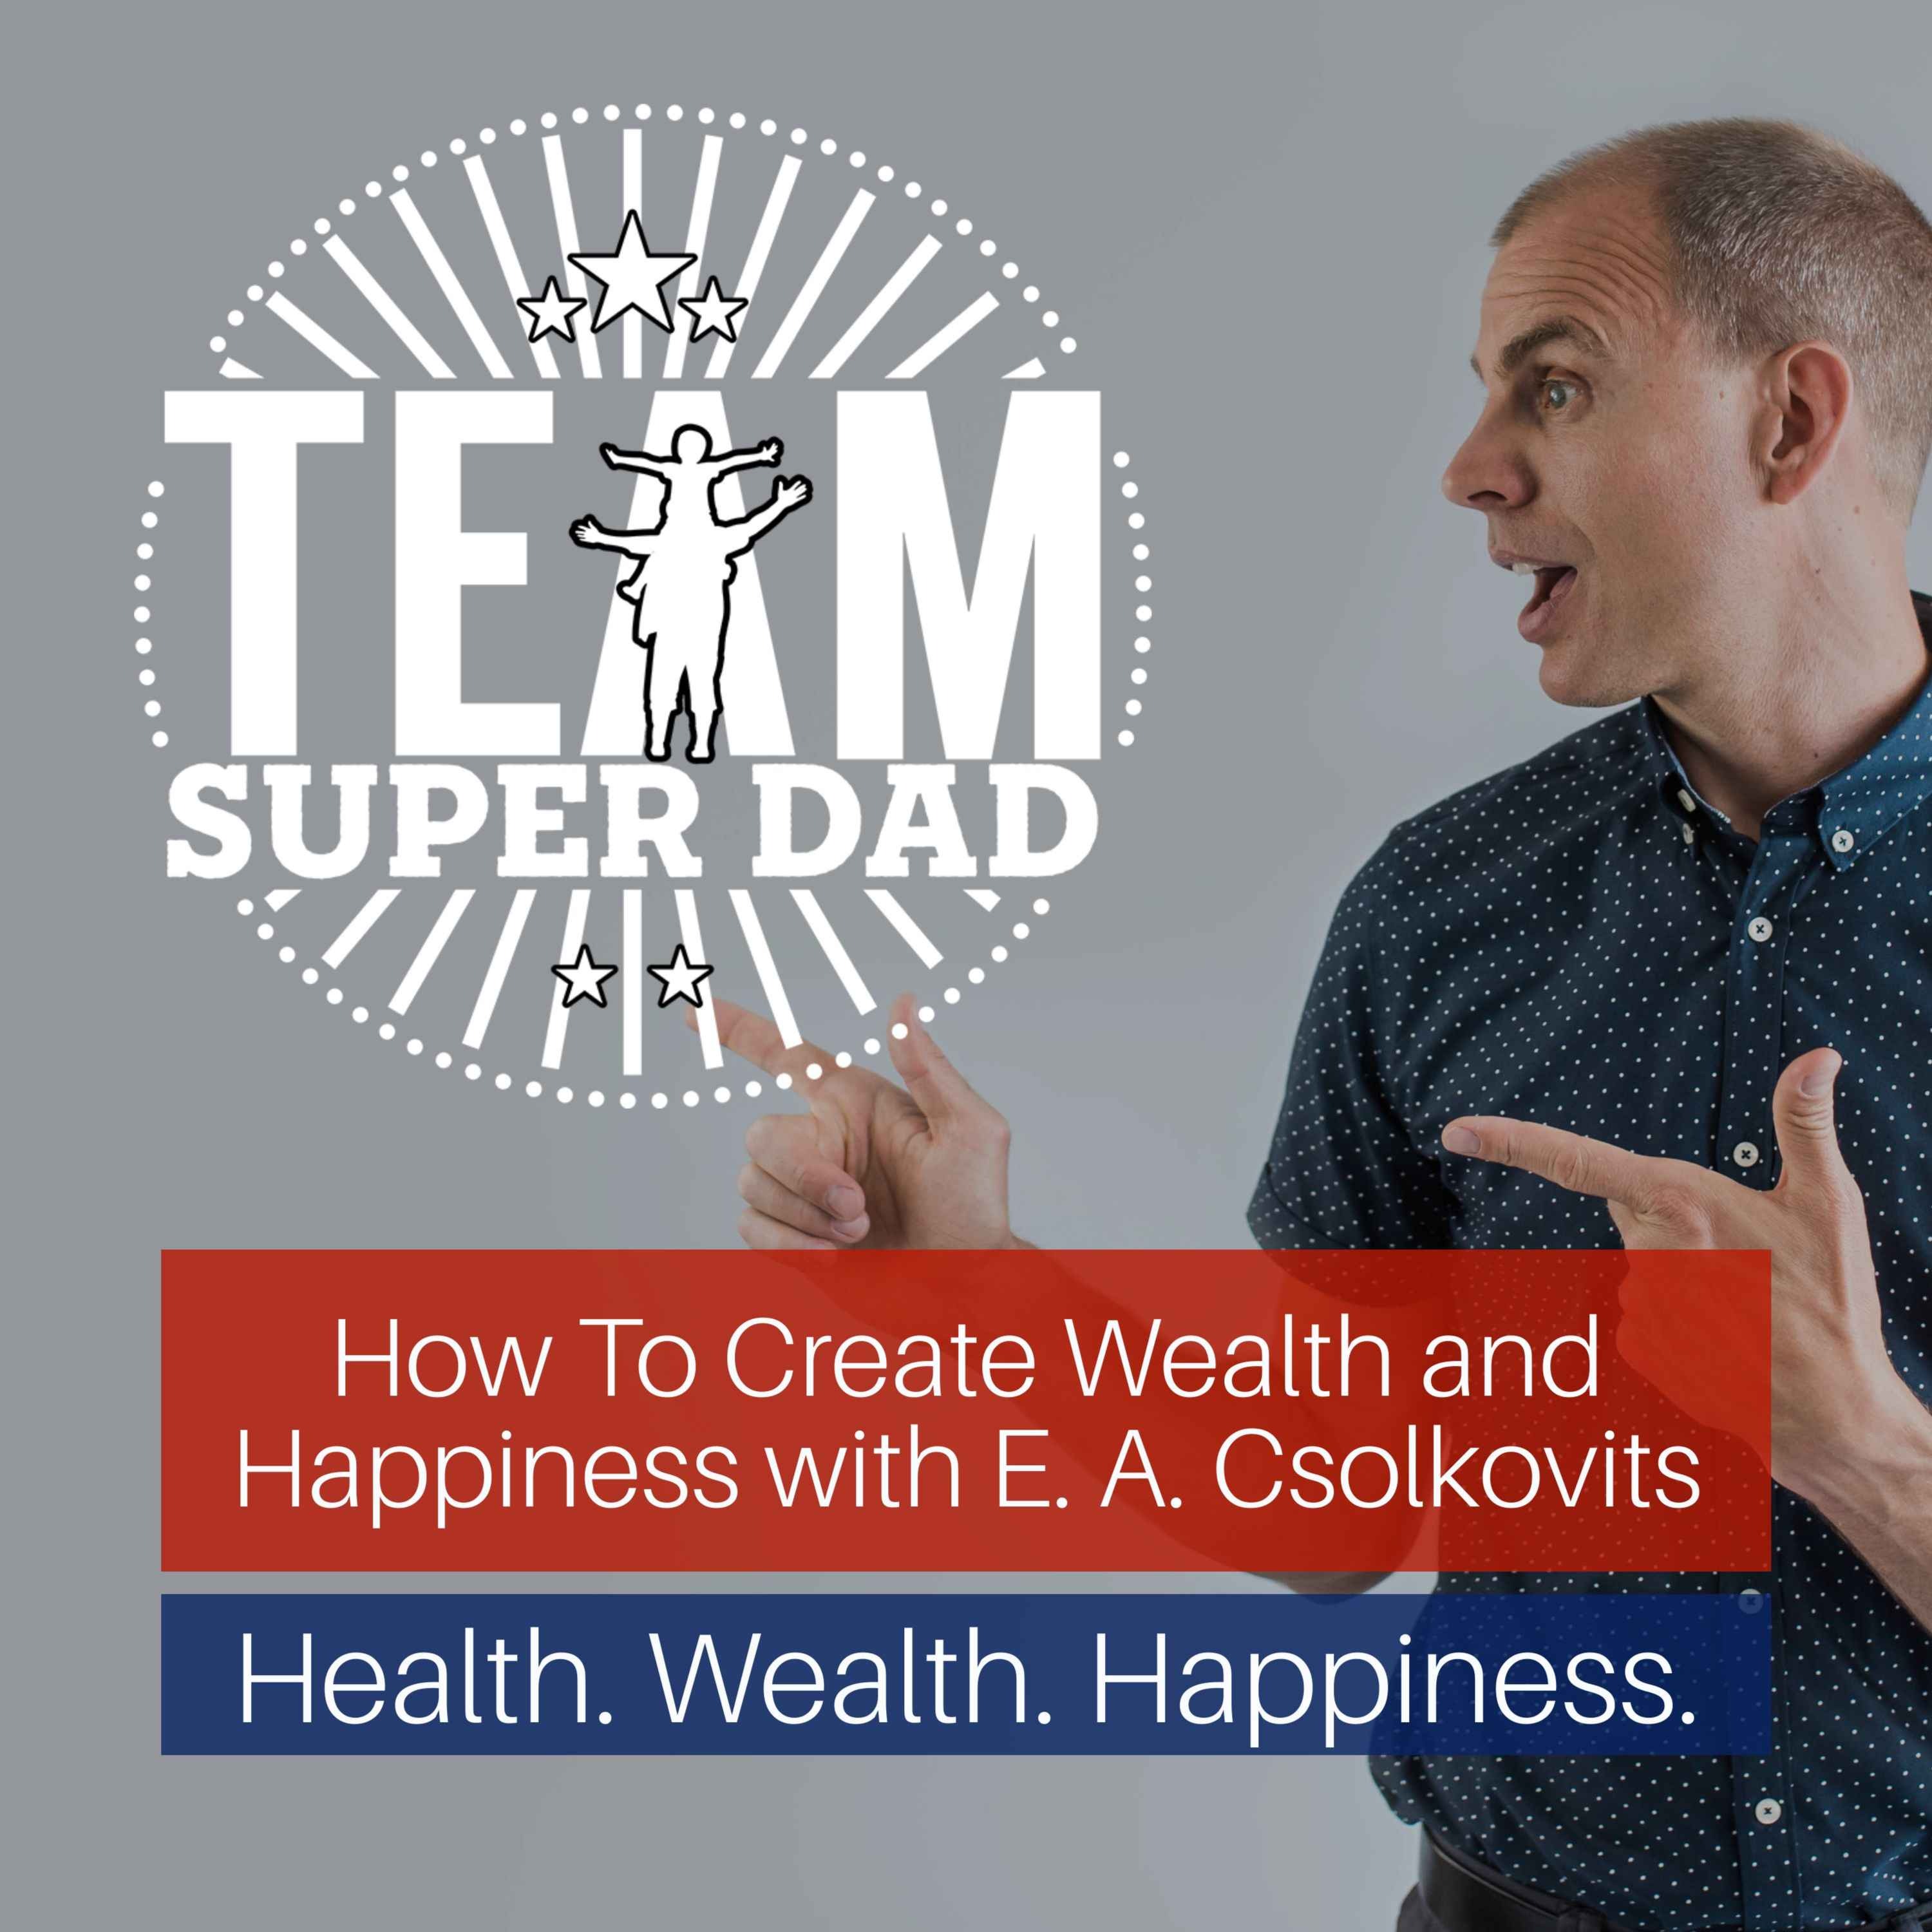 How To Create Wealth and Happiness with E. A. Csolkovits